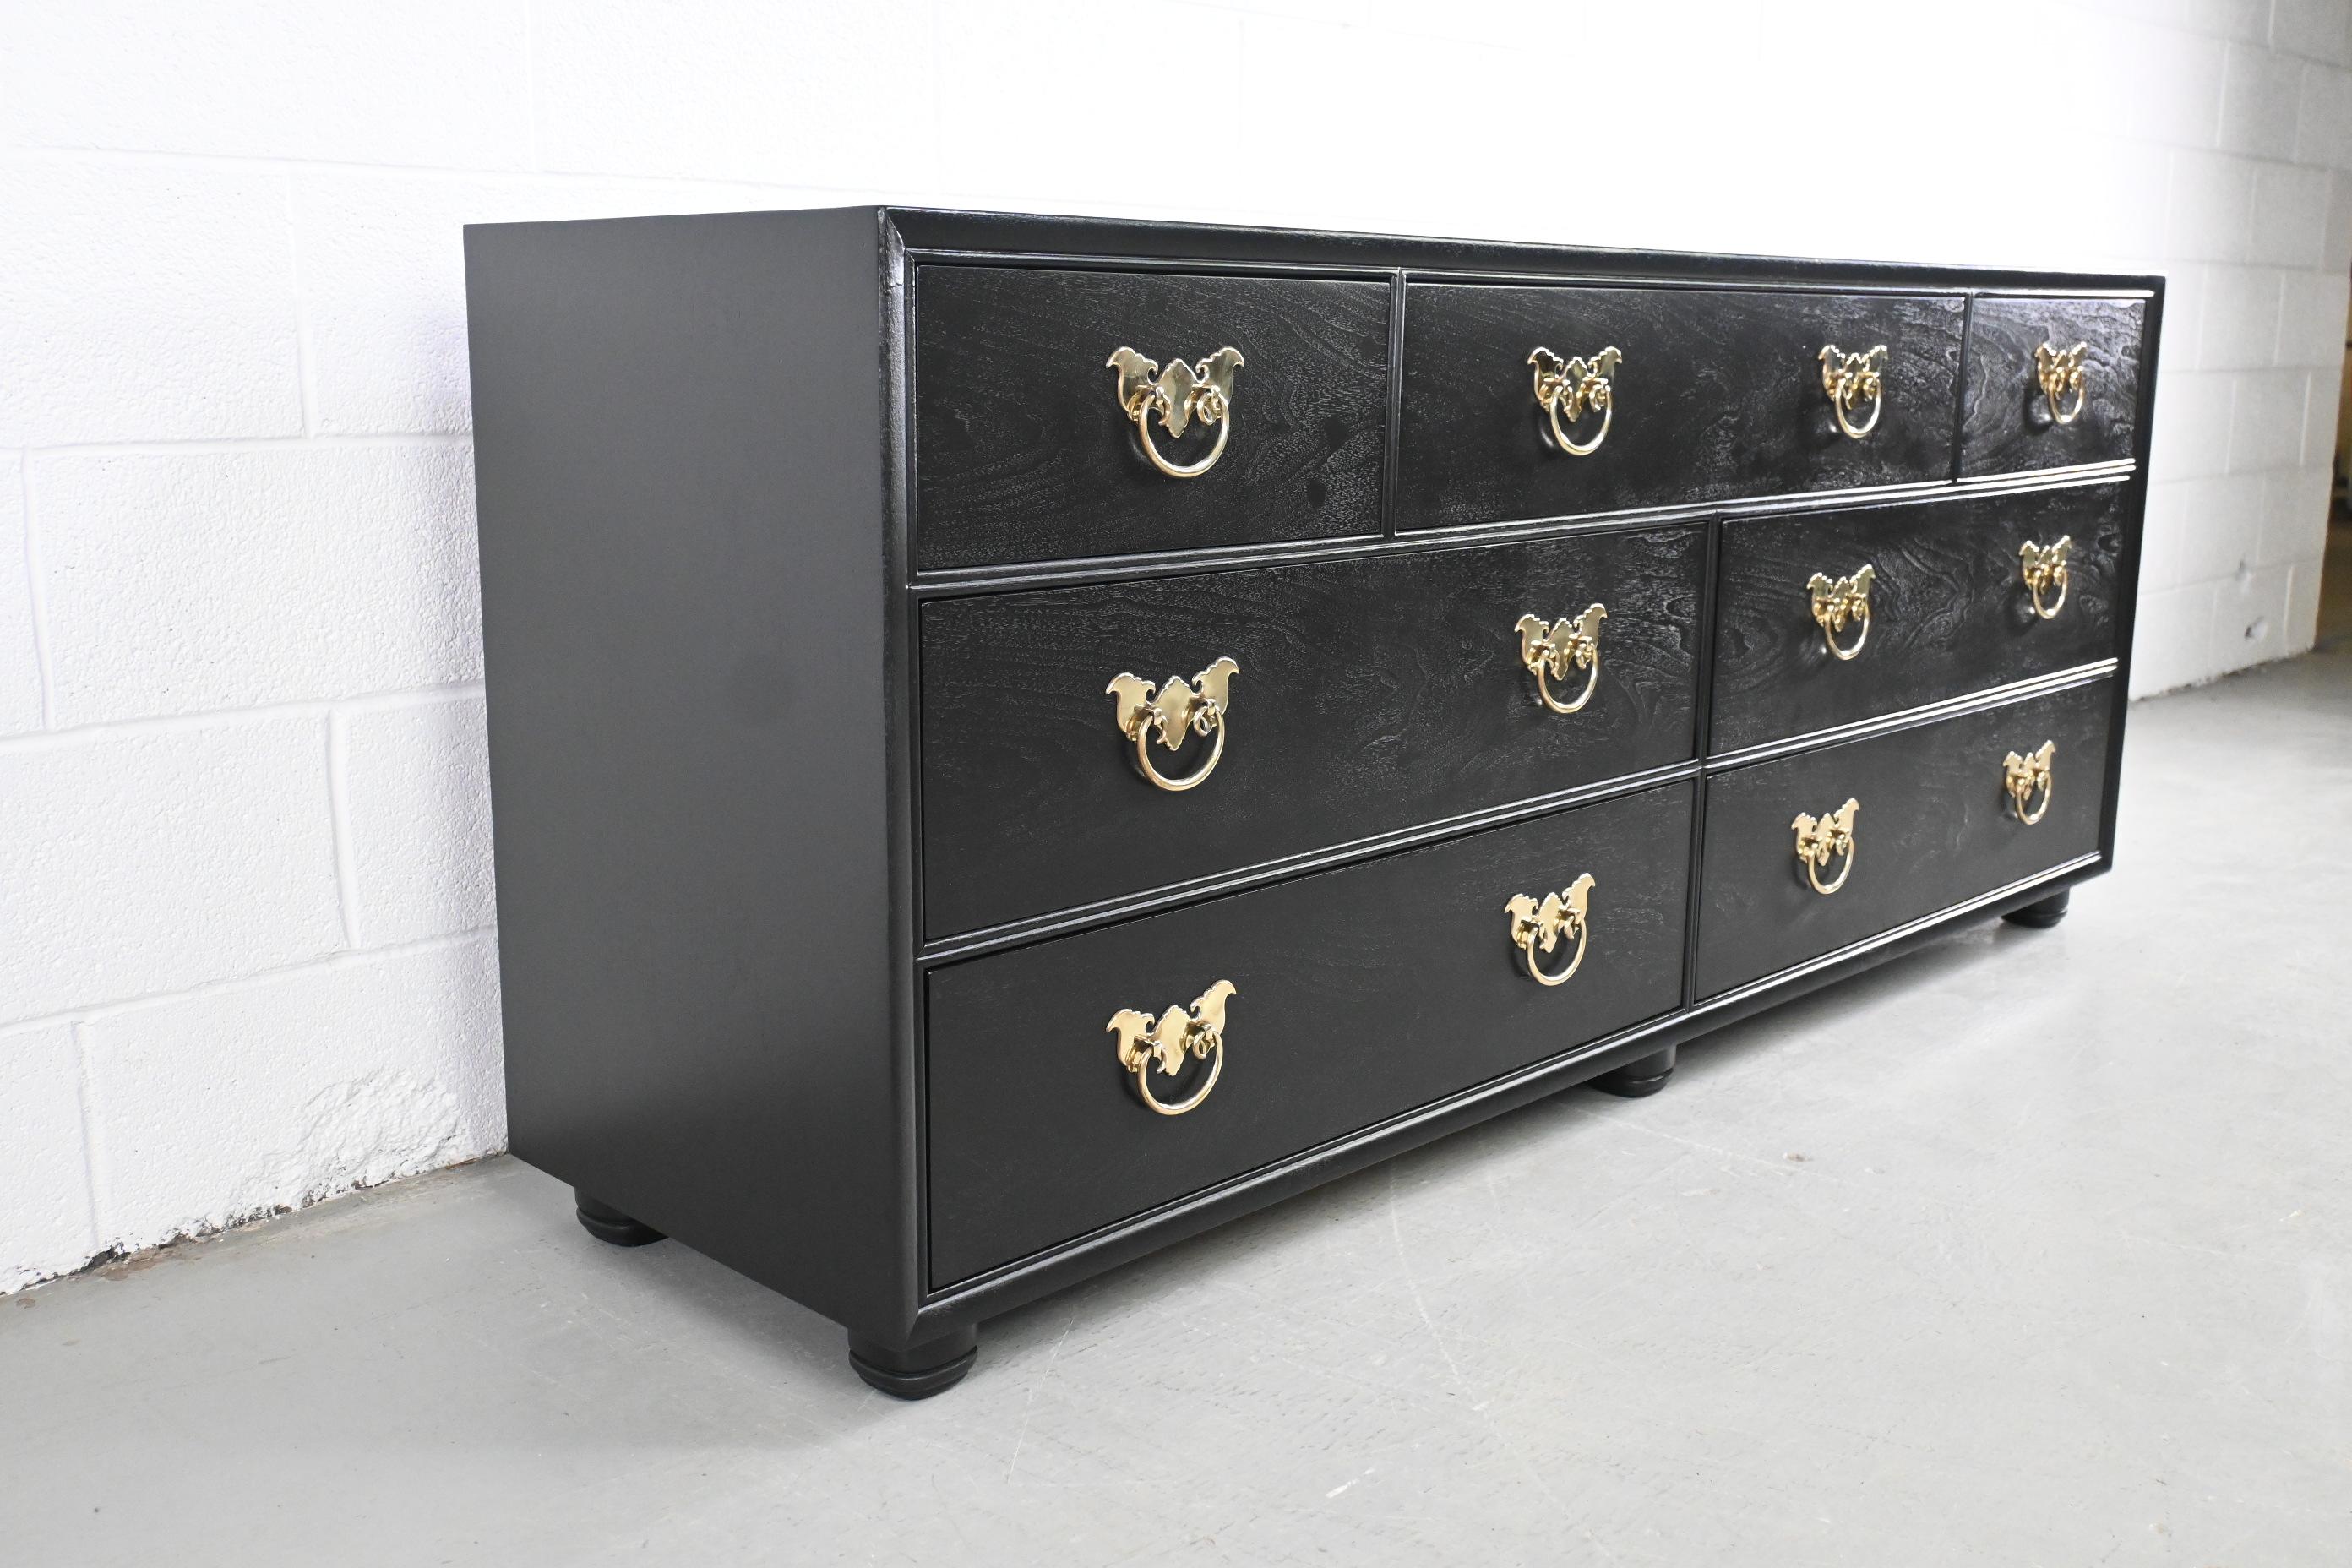 Henredon Furniture Chinese Chippendale Black Lacquered Seven Drawer Dresser

Henredon Furniture, USA, 1970s

72 Wide x 19 Deep x 30 High.

Asian-inspired black lacquered seven drawer dresser with purposefully distressed black lacquered finish